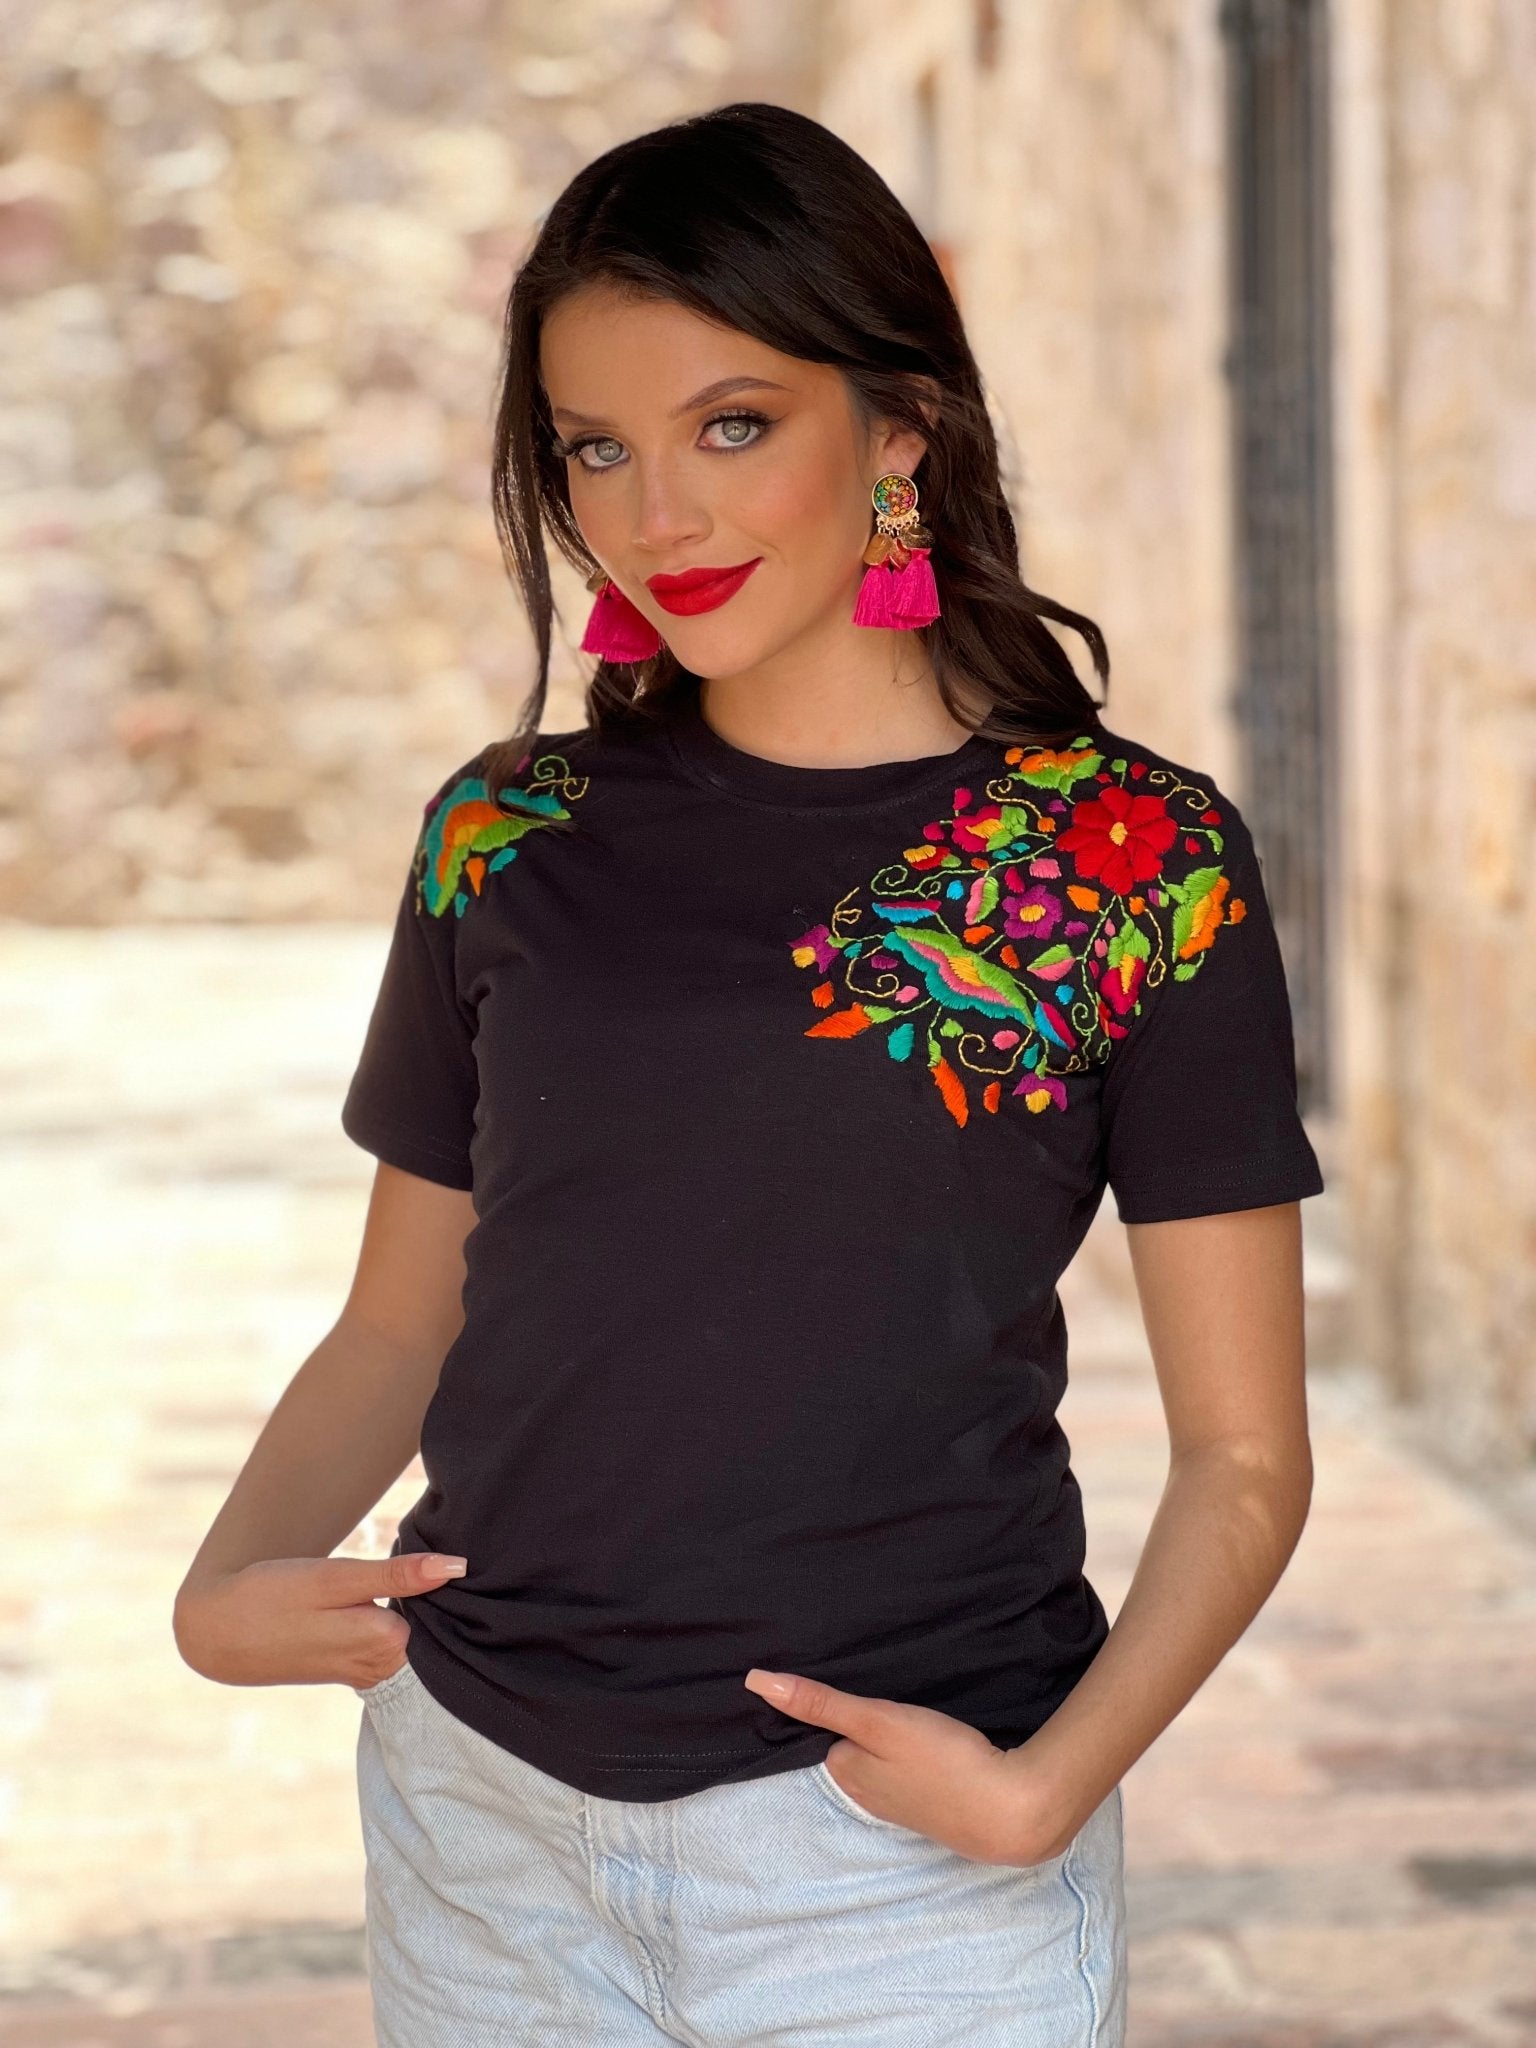 Mexican Artisanal Floral Embroidered T-Shirt. T-Shirt Carolina - Solei Store